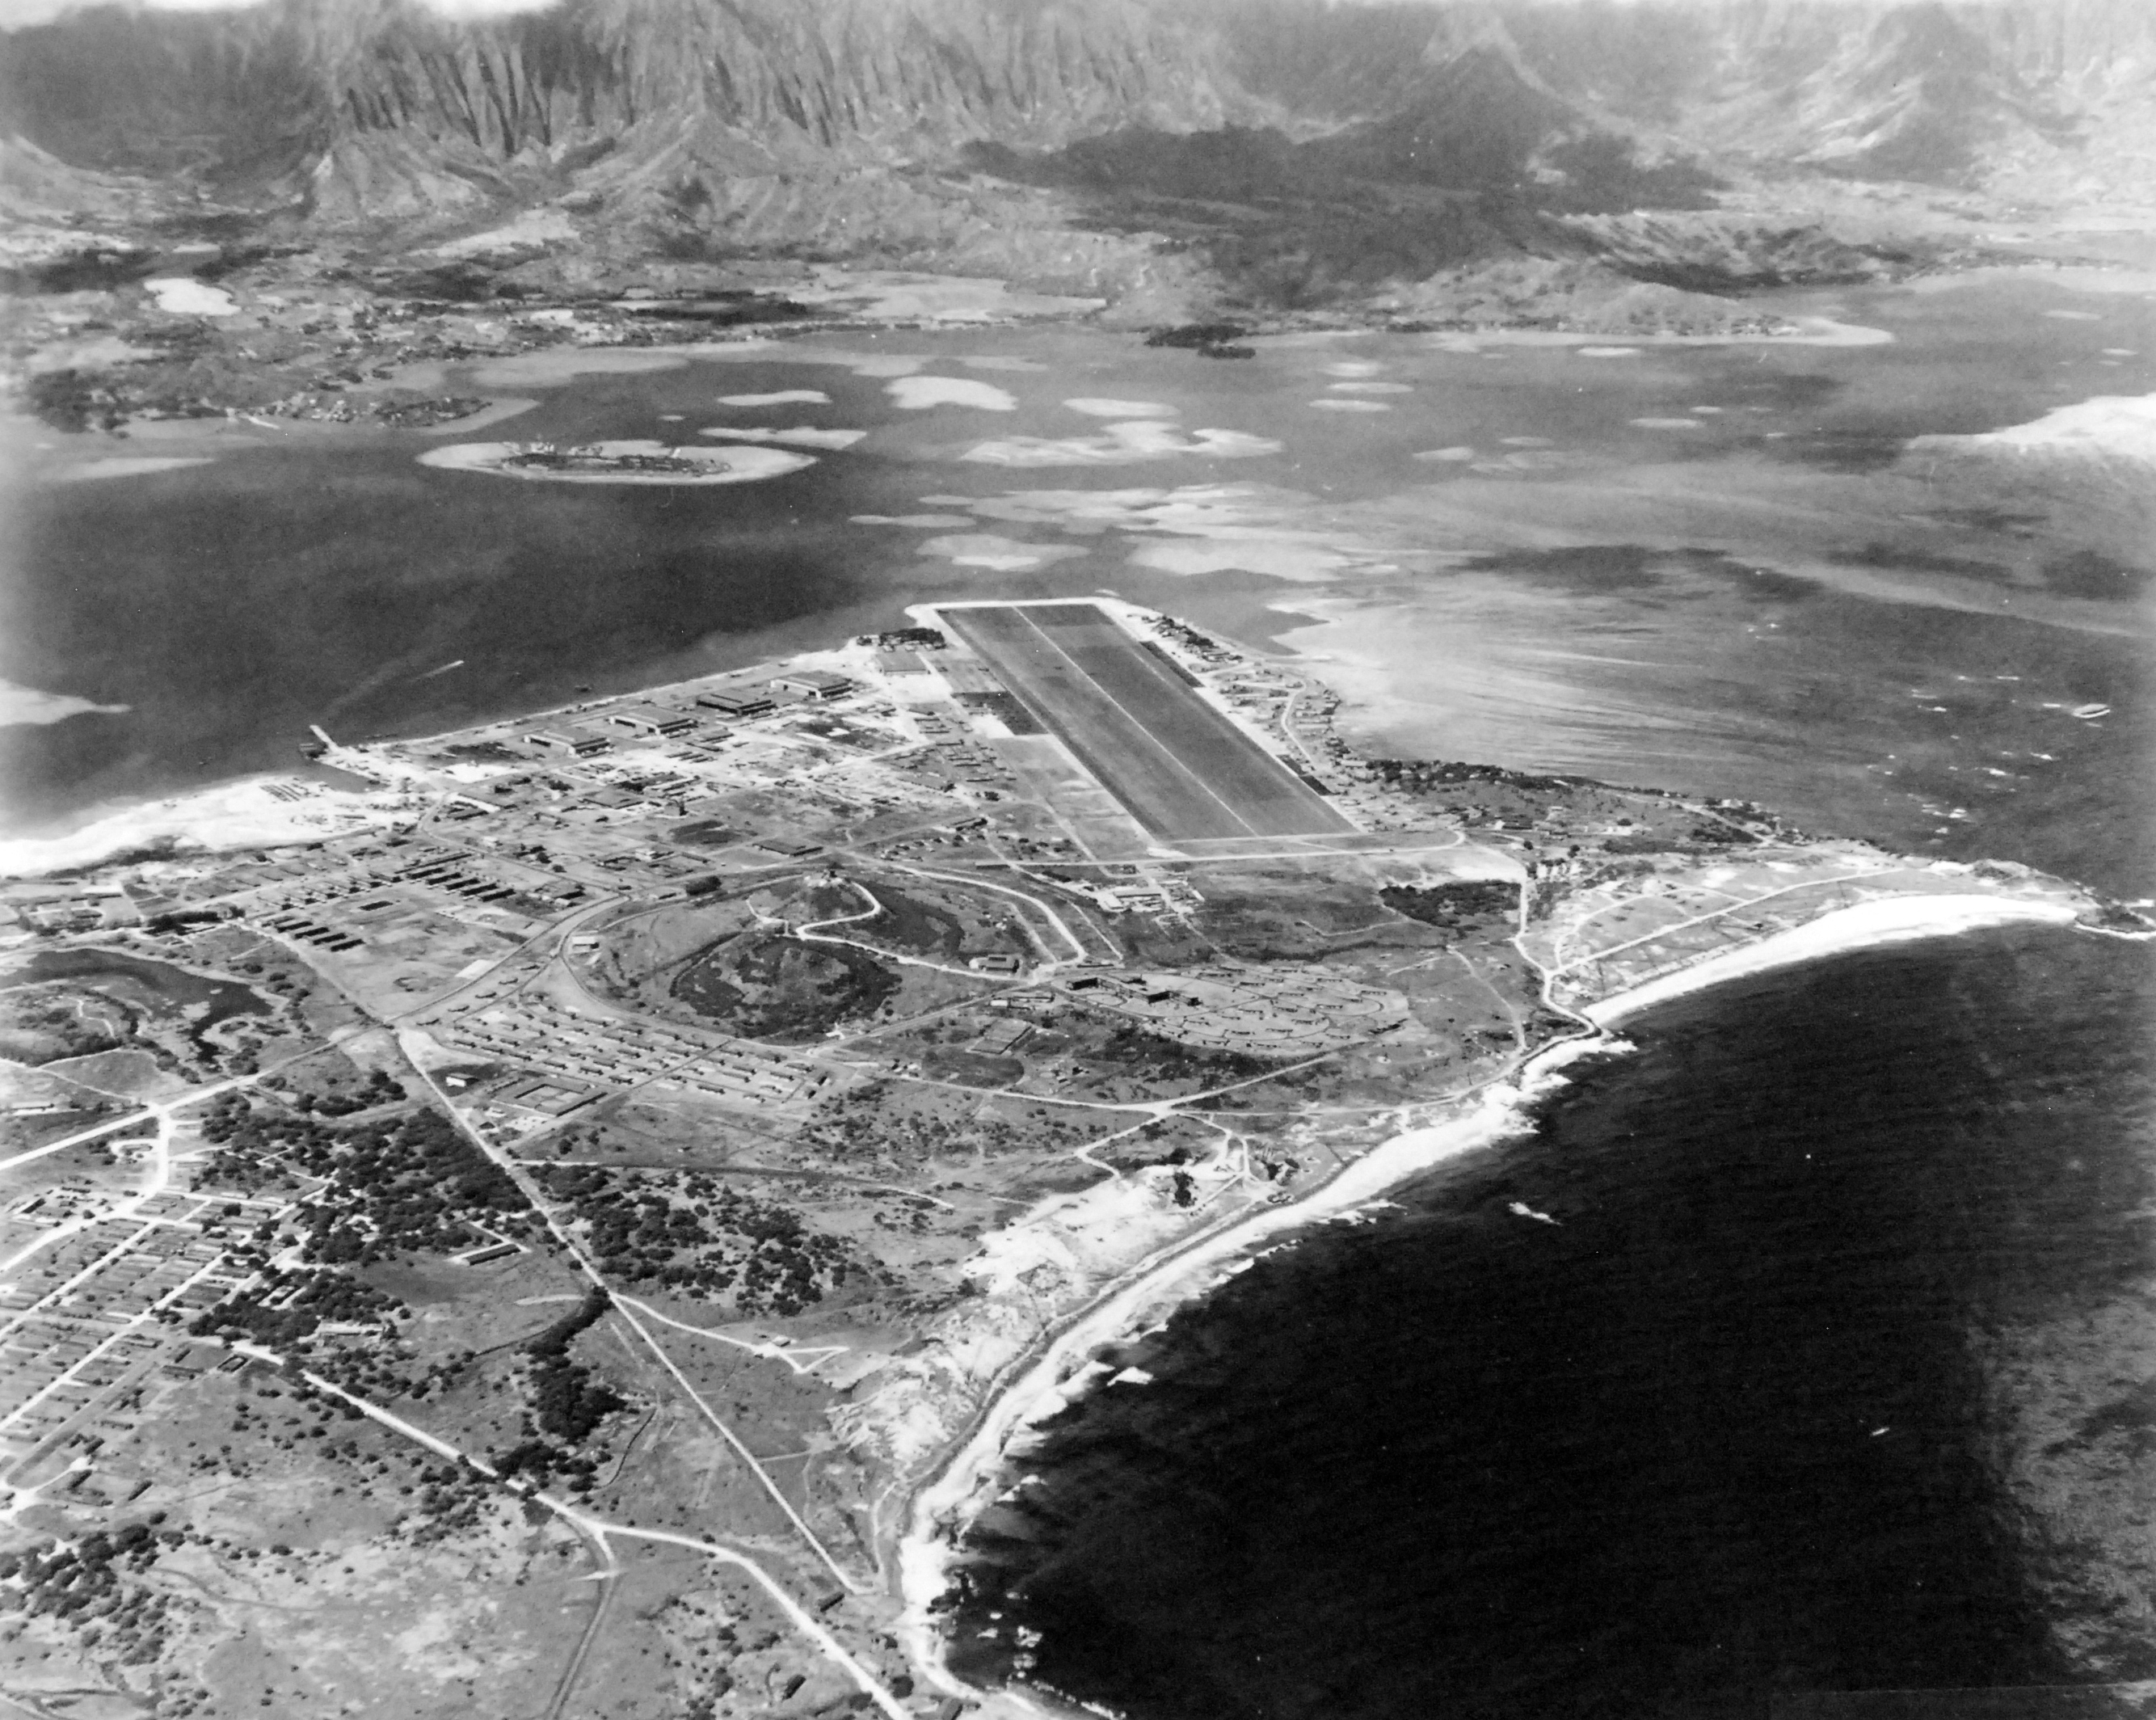 Aerial view of Naval Air Station Kaneohe, Oahu, Hawaii with Kaneohe Bay seen beyond the airstrip, Jun 1944.